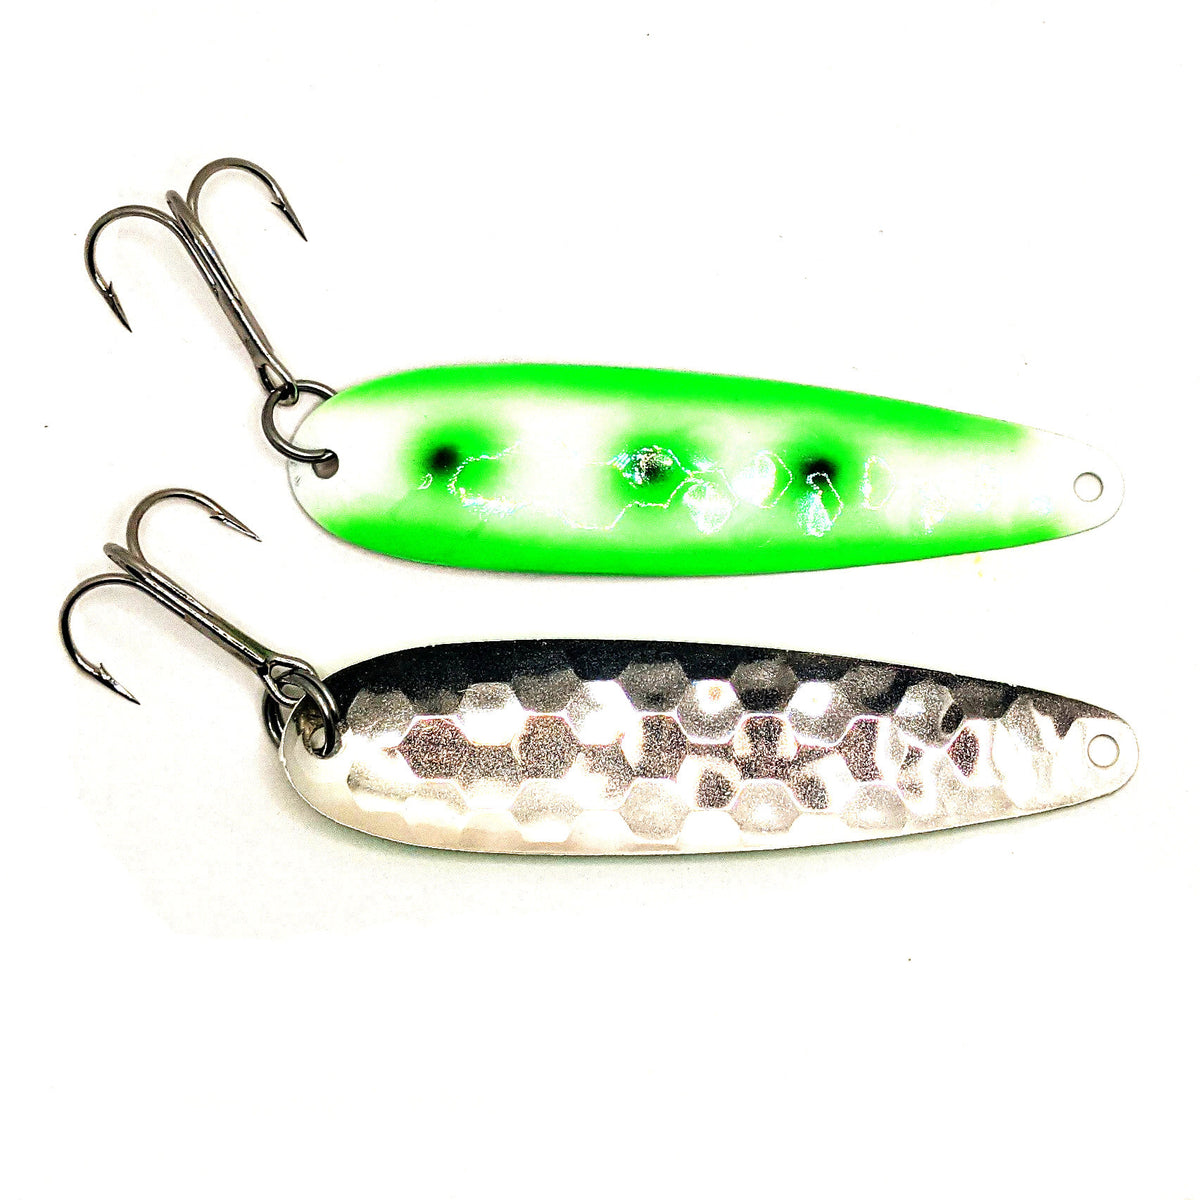 SALMON CANDY GLOW MAGNUM SPOON – Grimsby Tackle